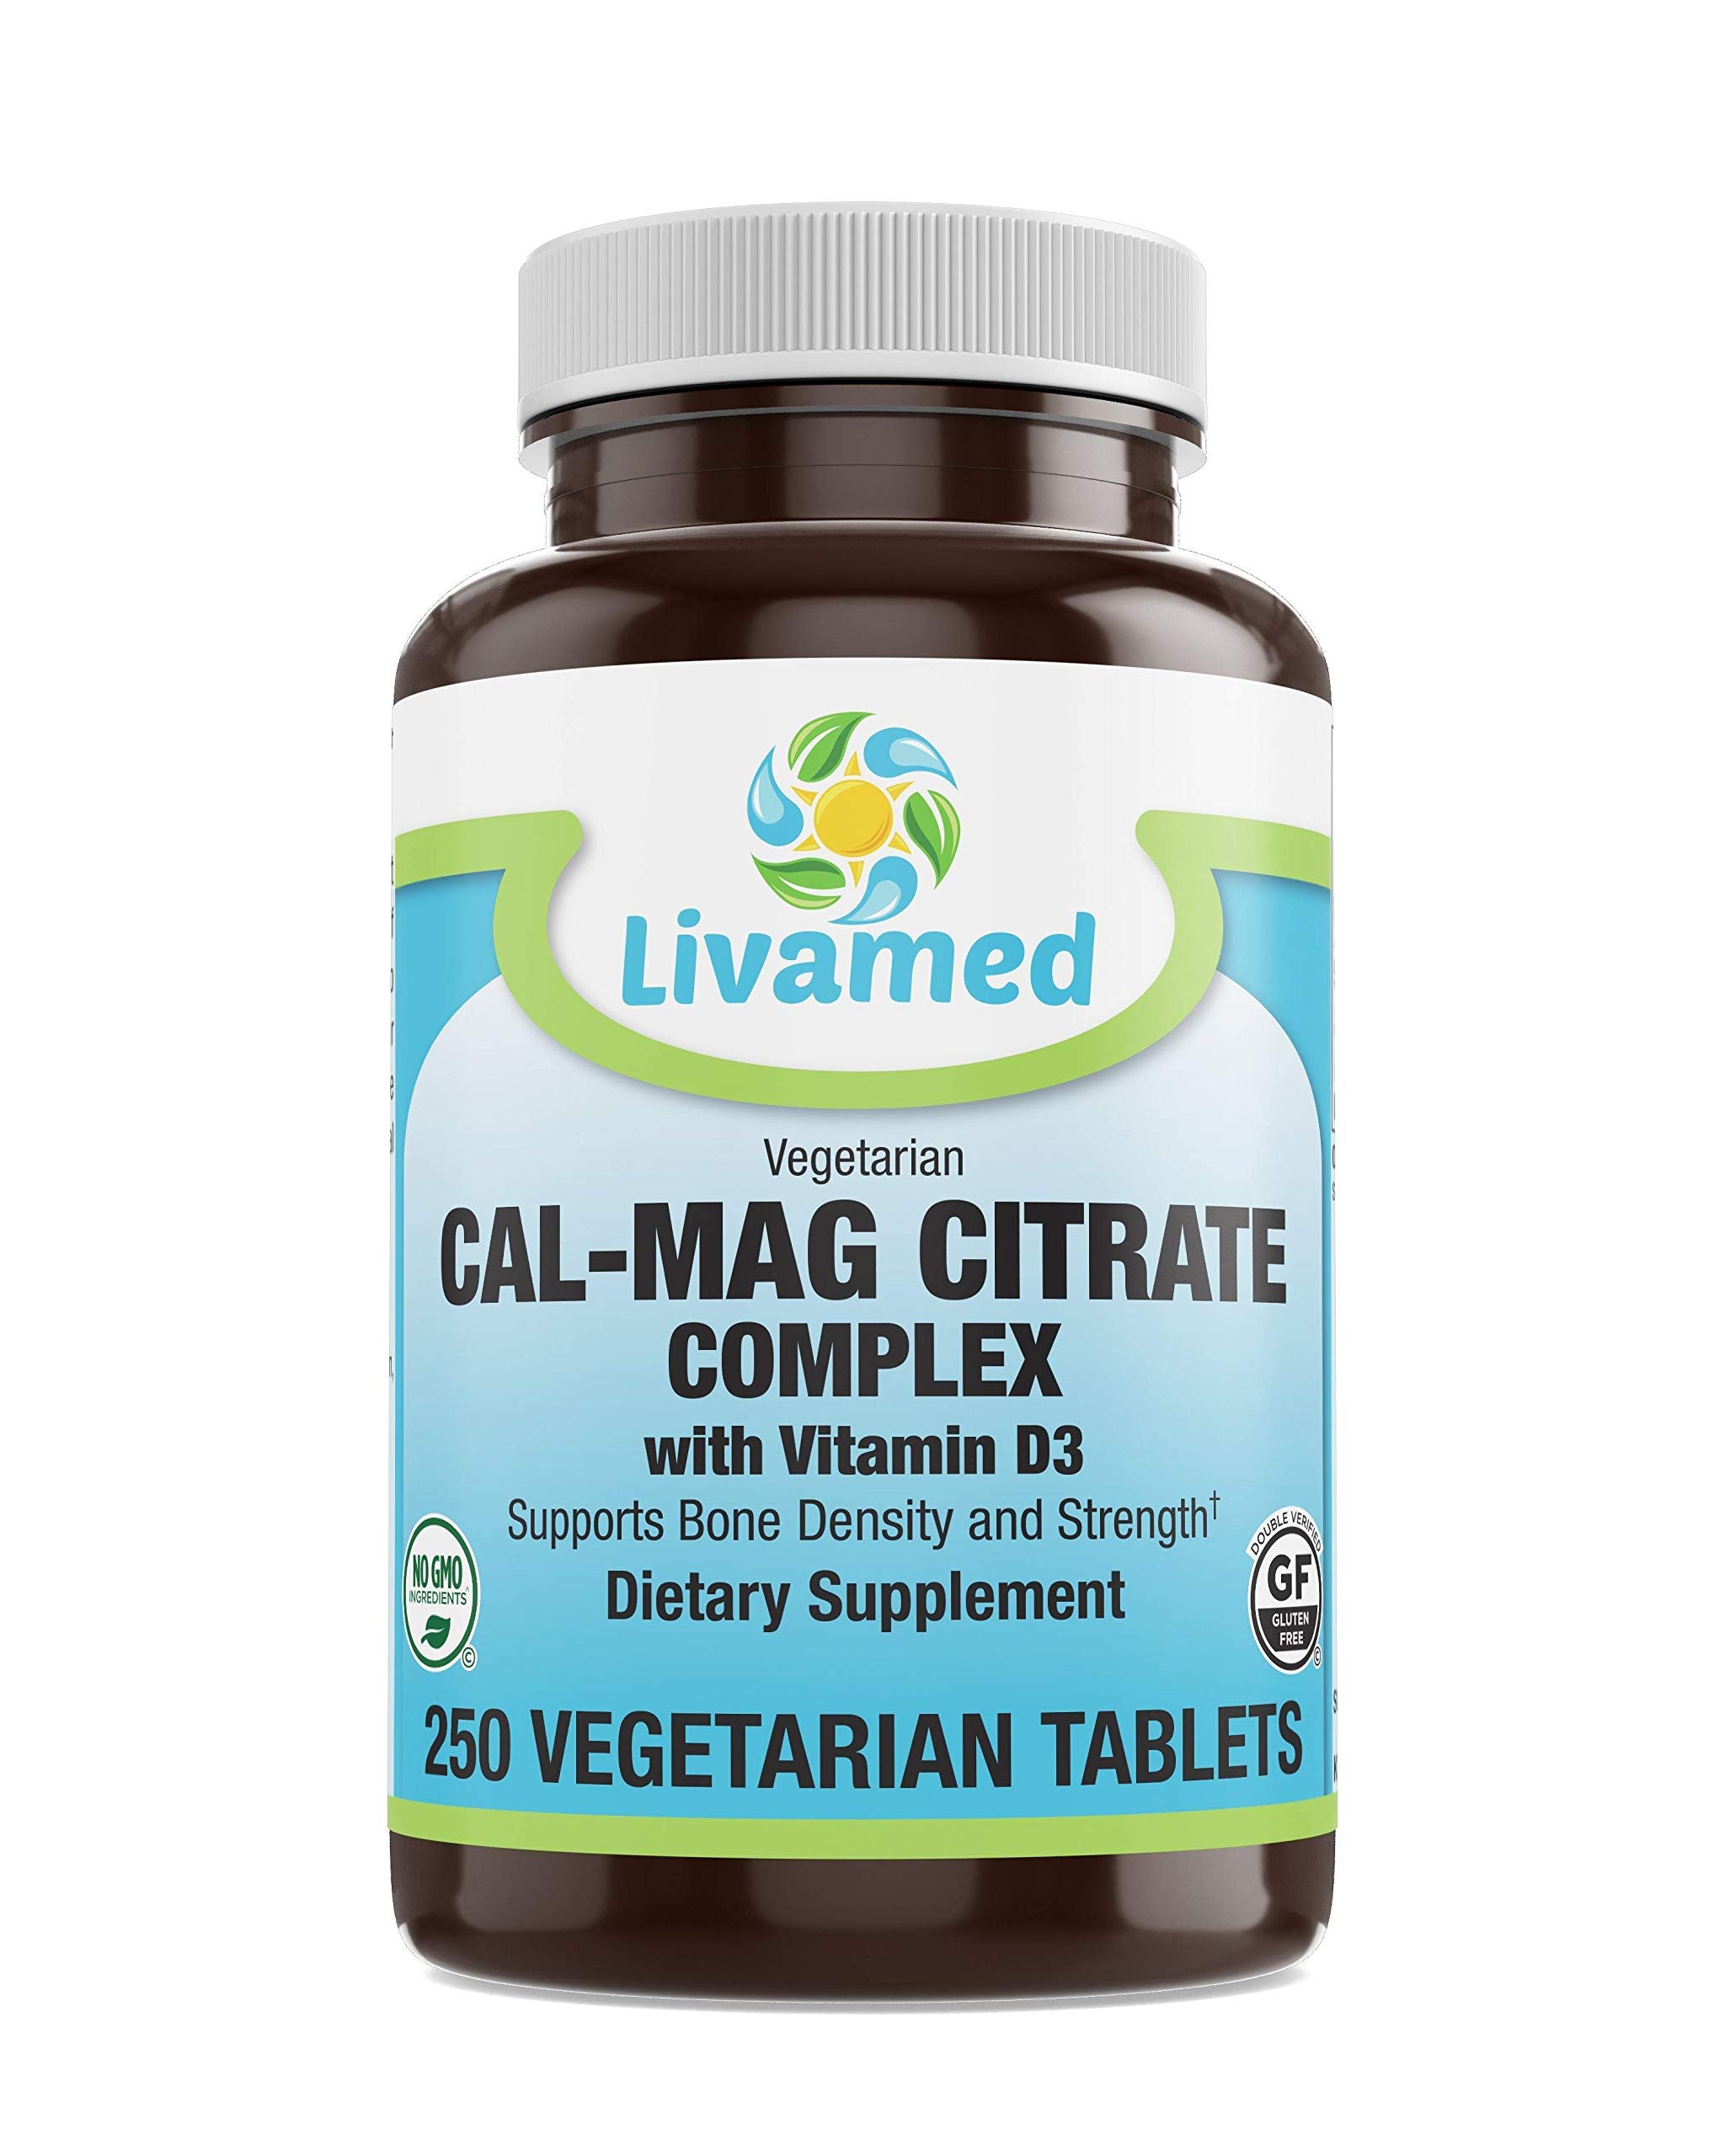 Livamed - Cal-Mag Citrate Complex with Vitamin D3 Veg Tabs 250 Count